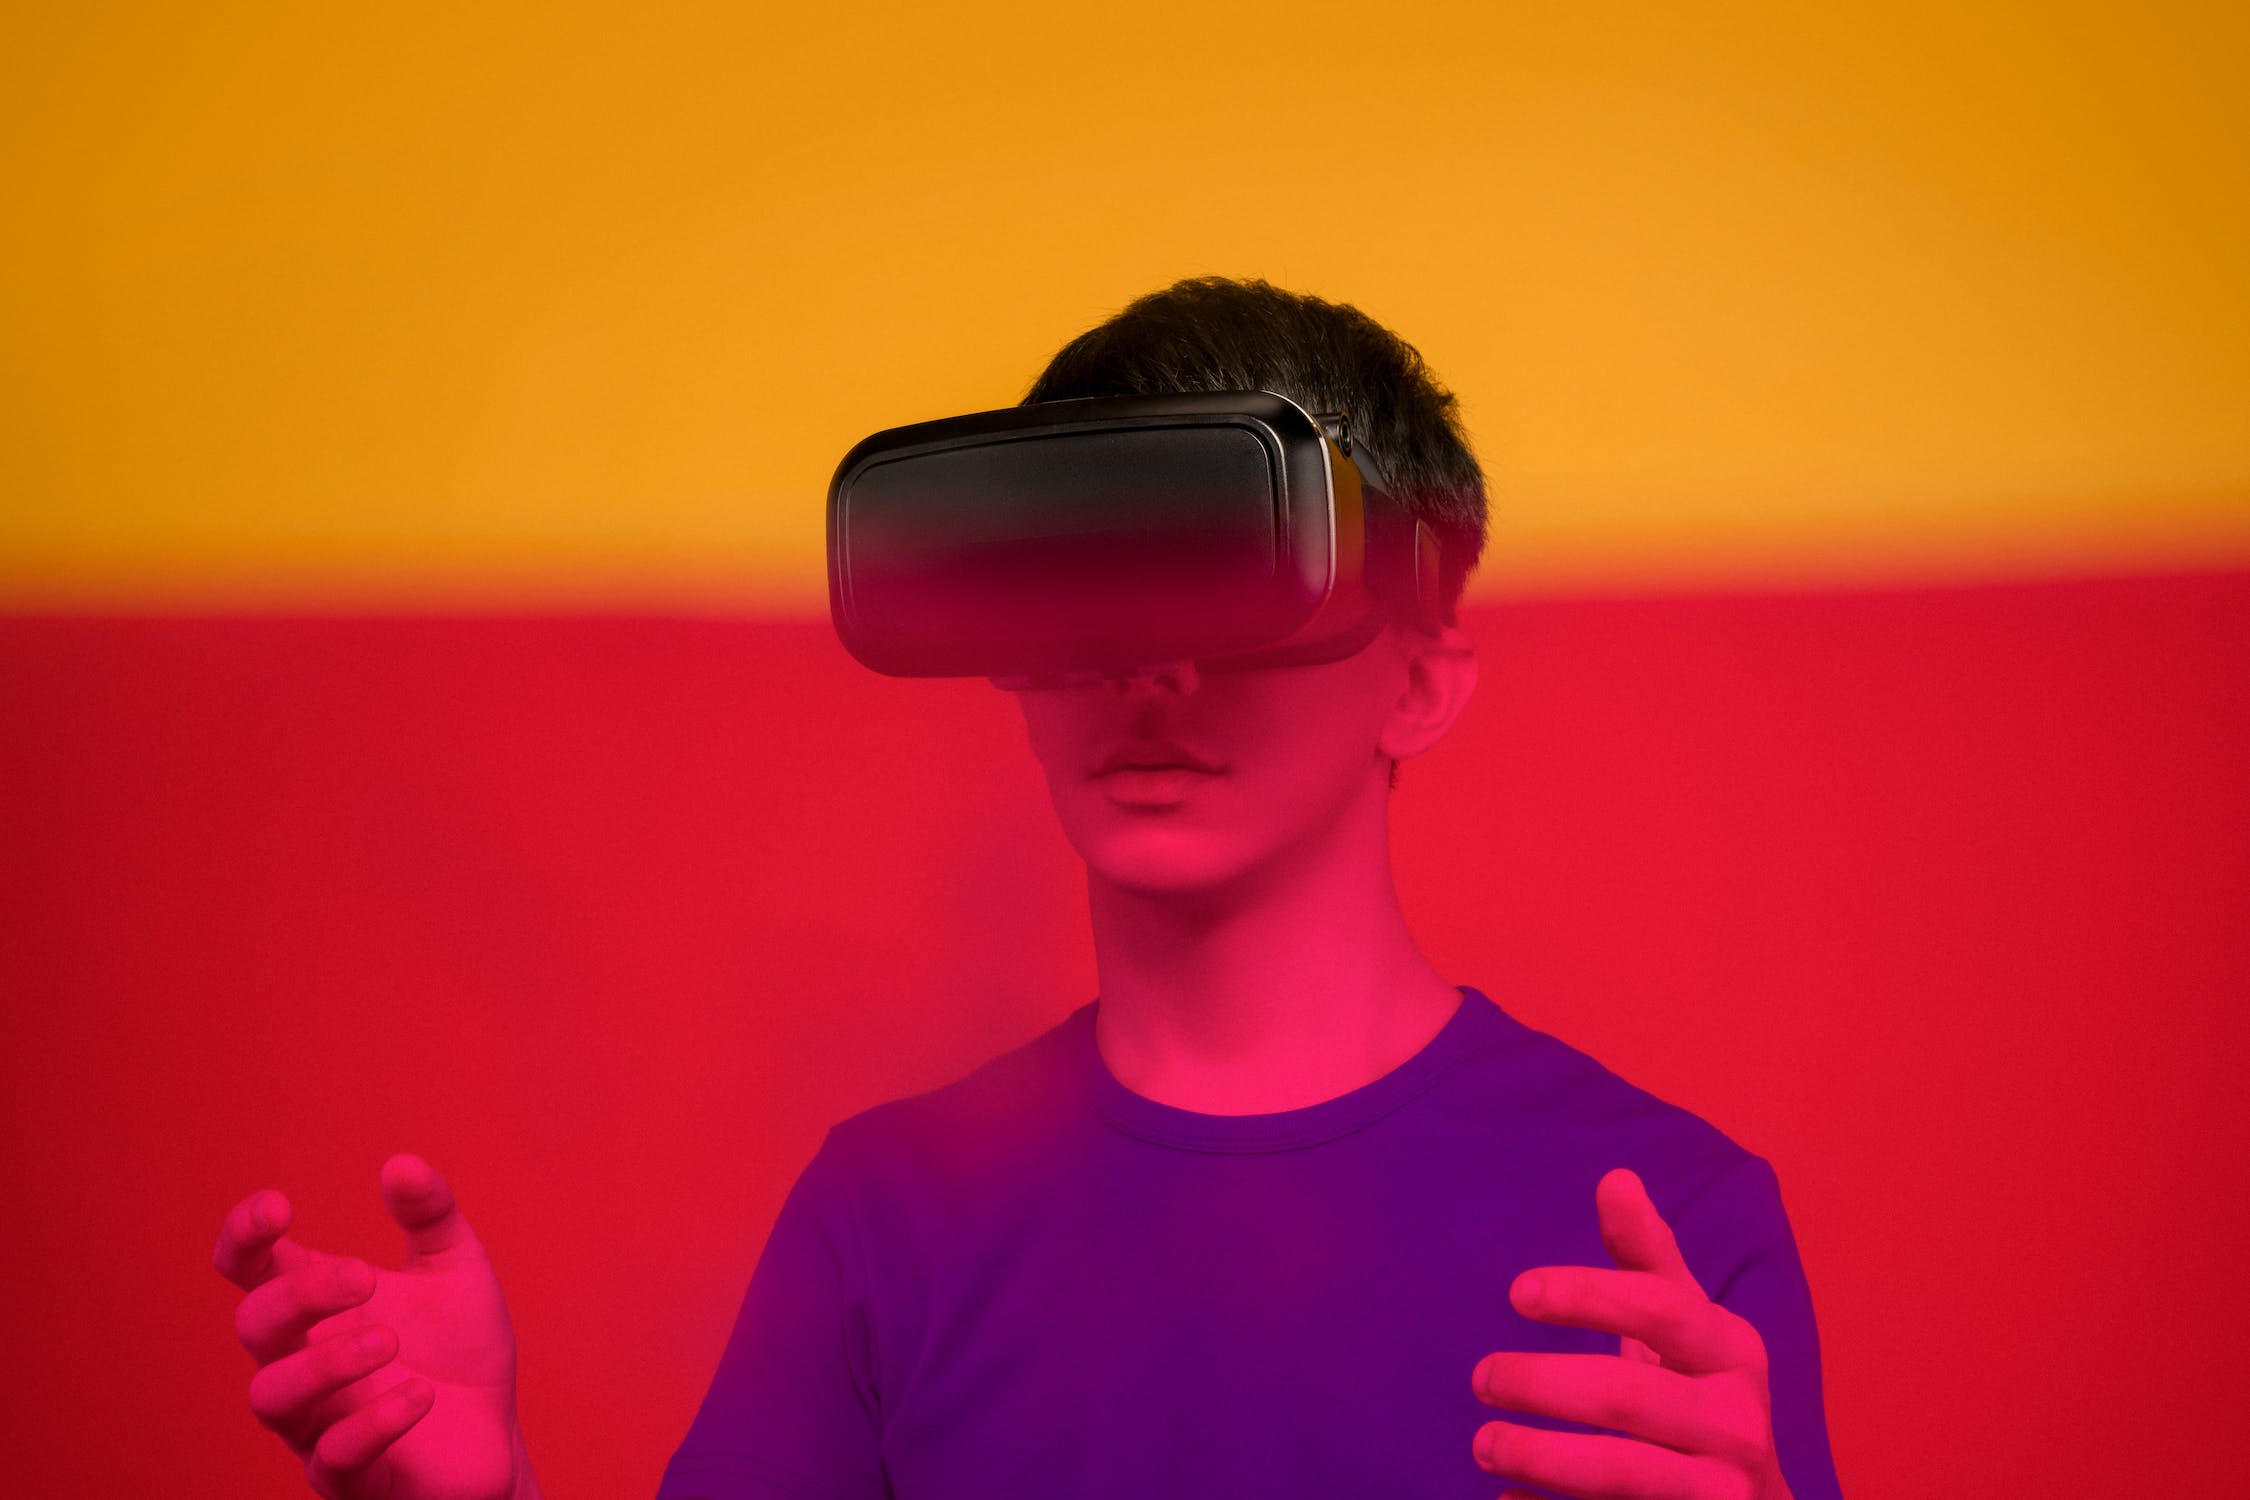 Virtual Reality as an Immersive Experience